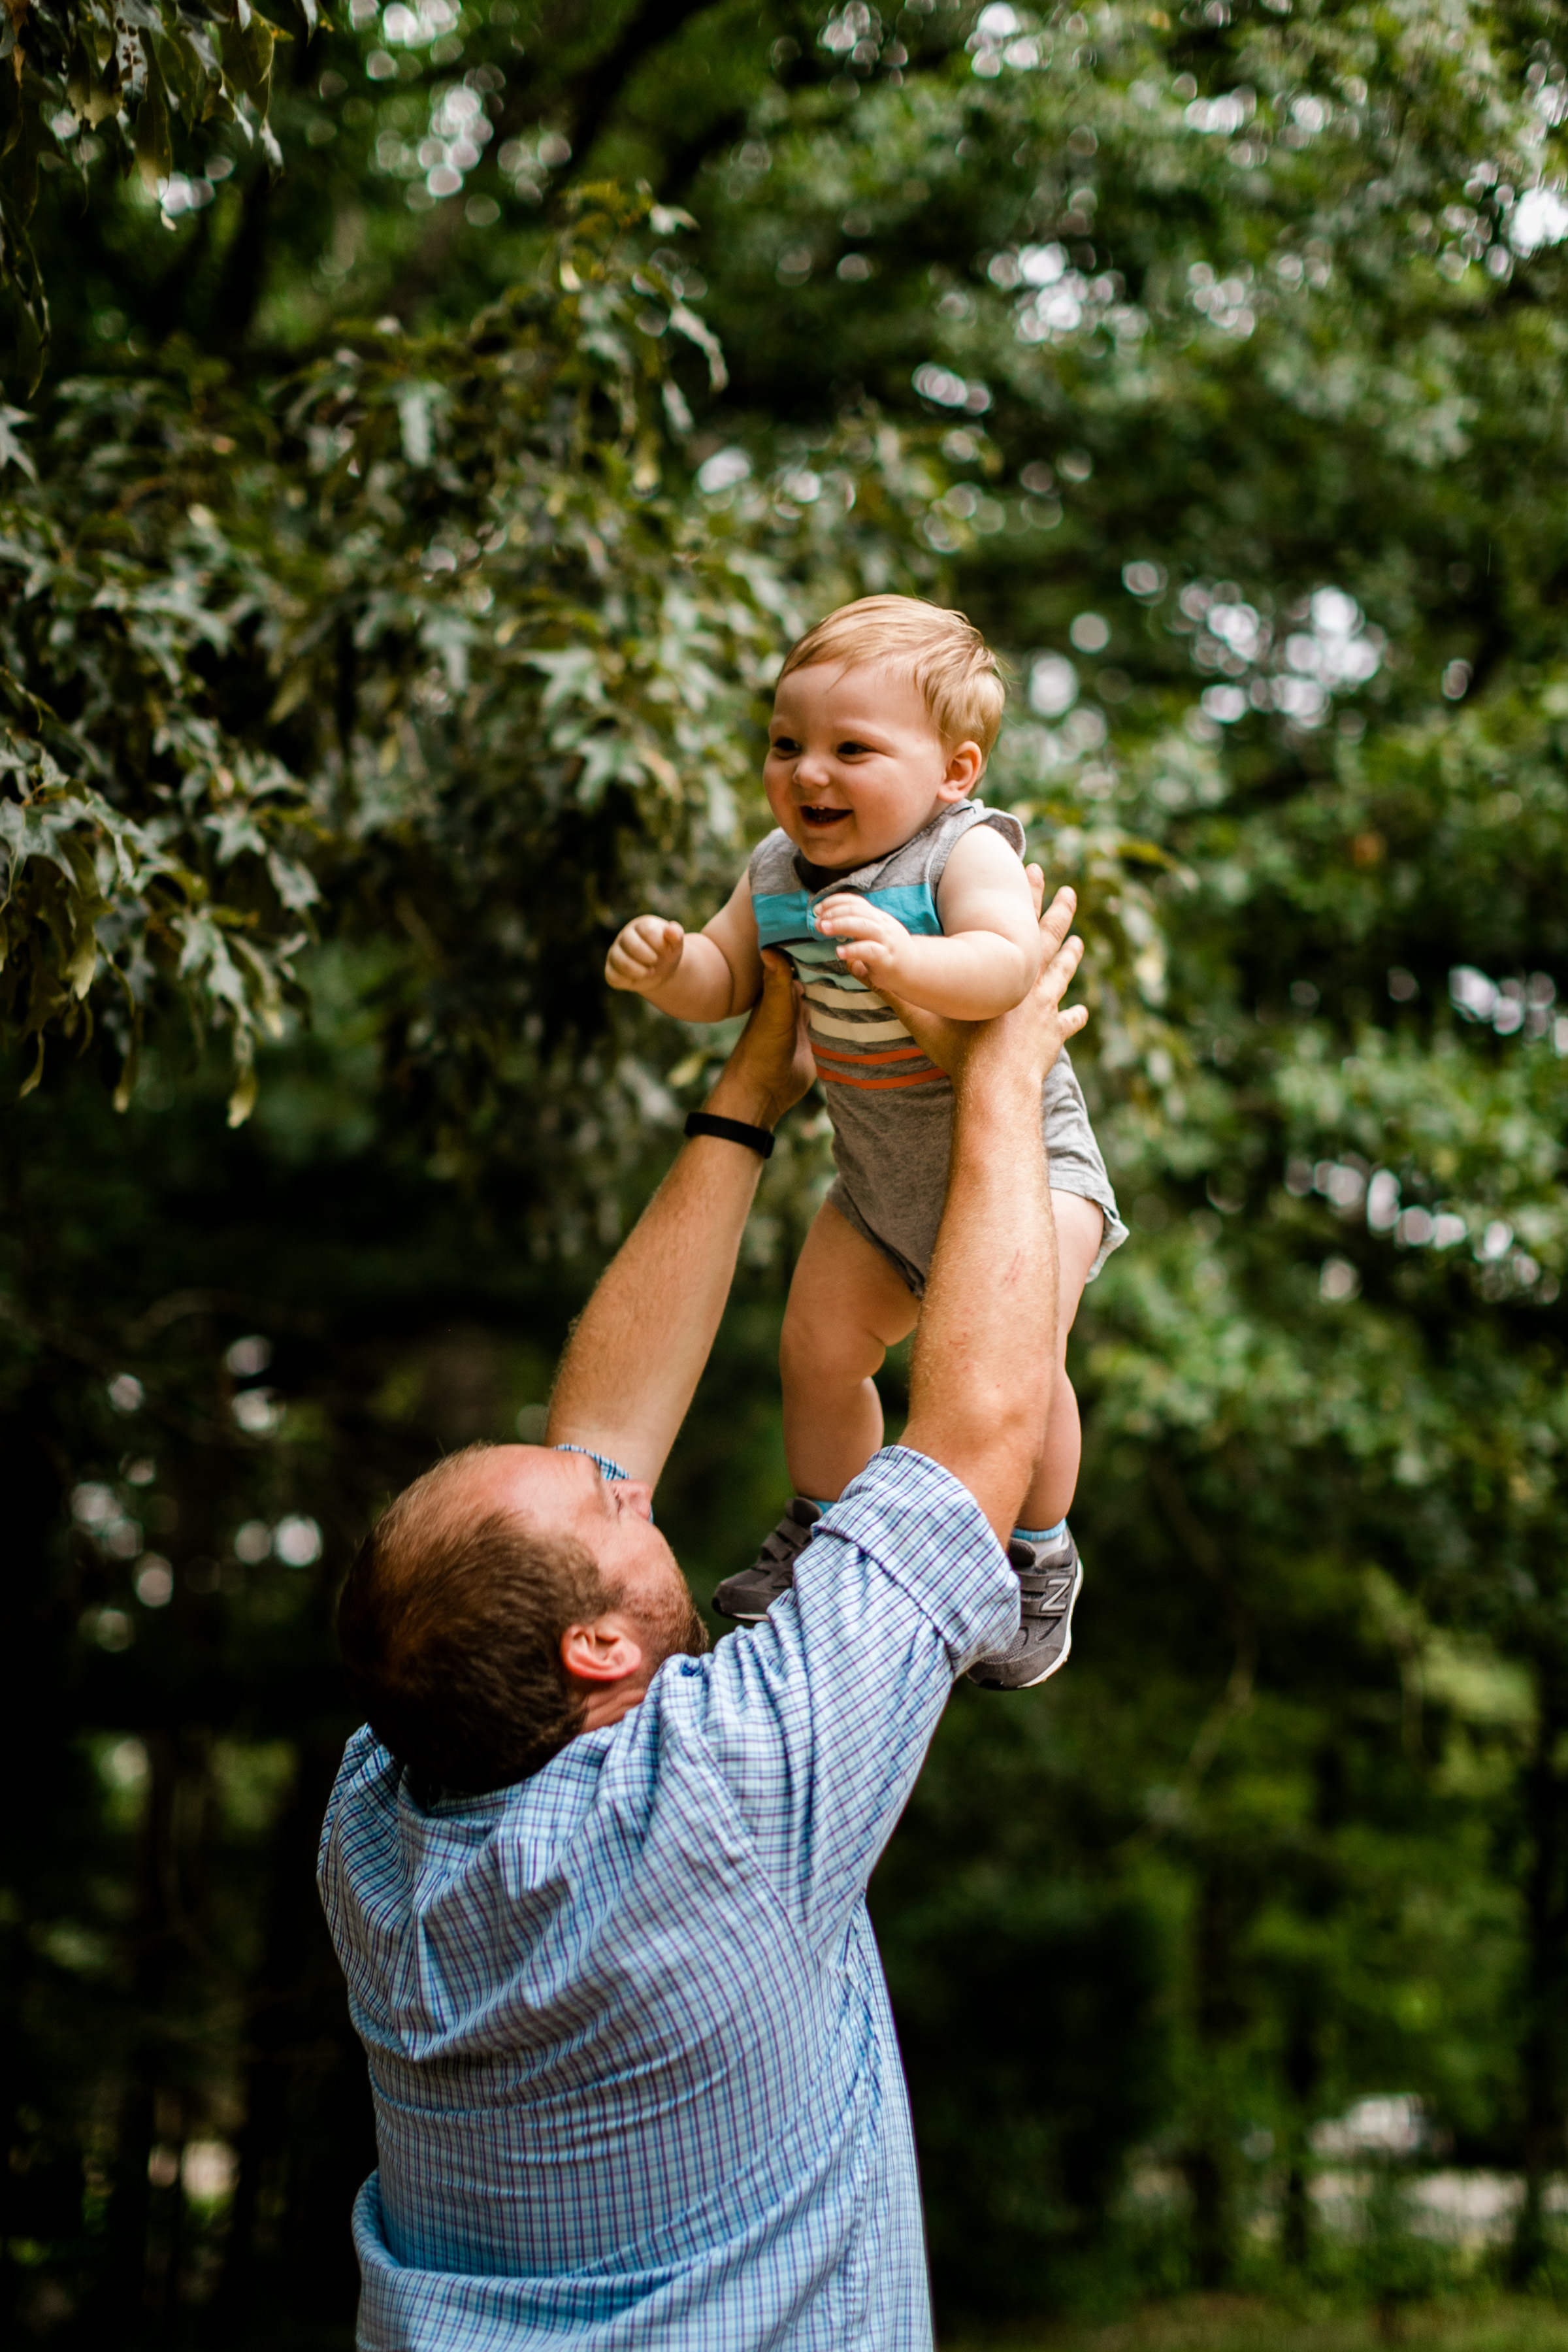 Durham Family Photographer | By G. Lin Photography | Outdoor portraits at Spruce Pine Lodge | Dad throwing son in the air